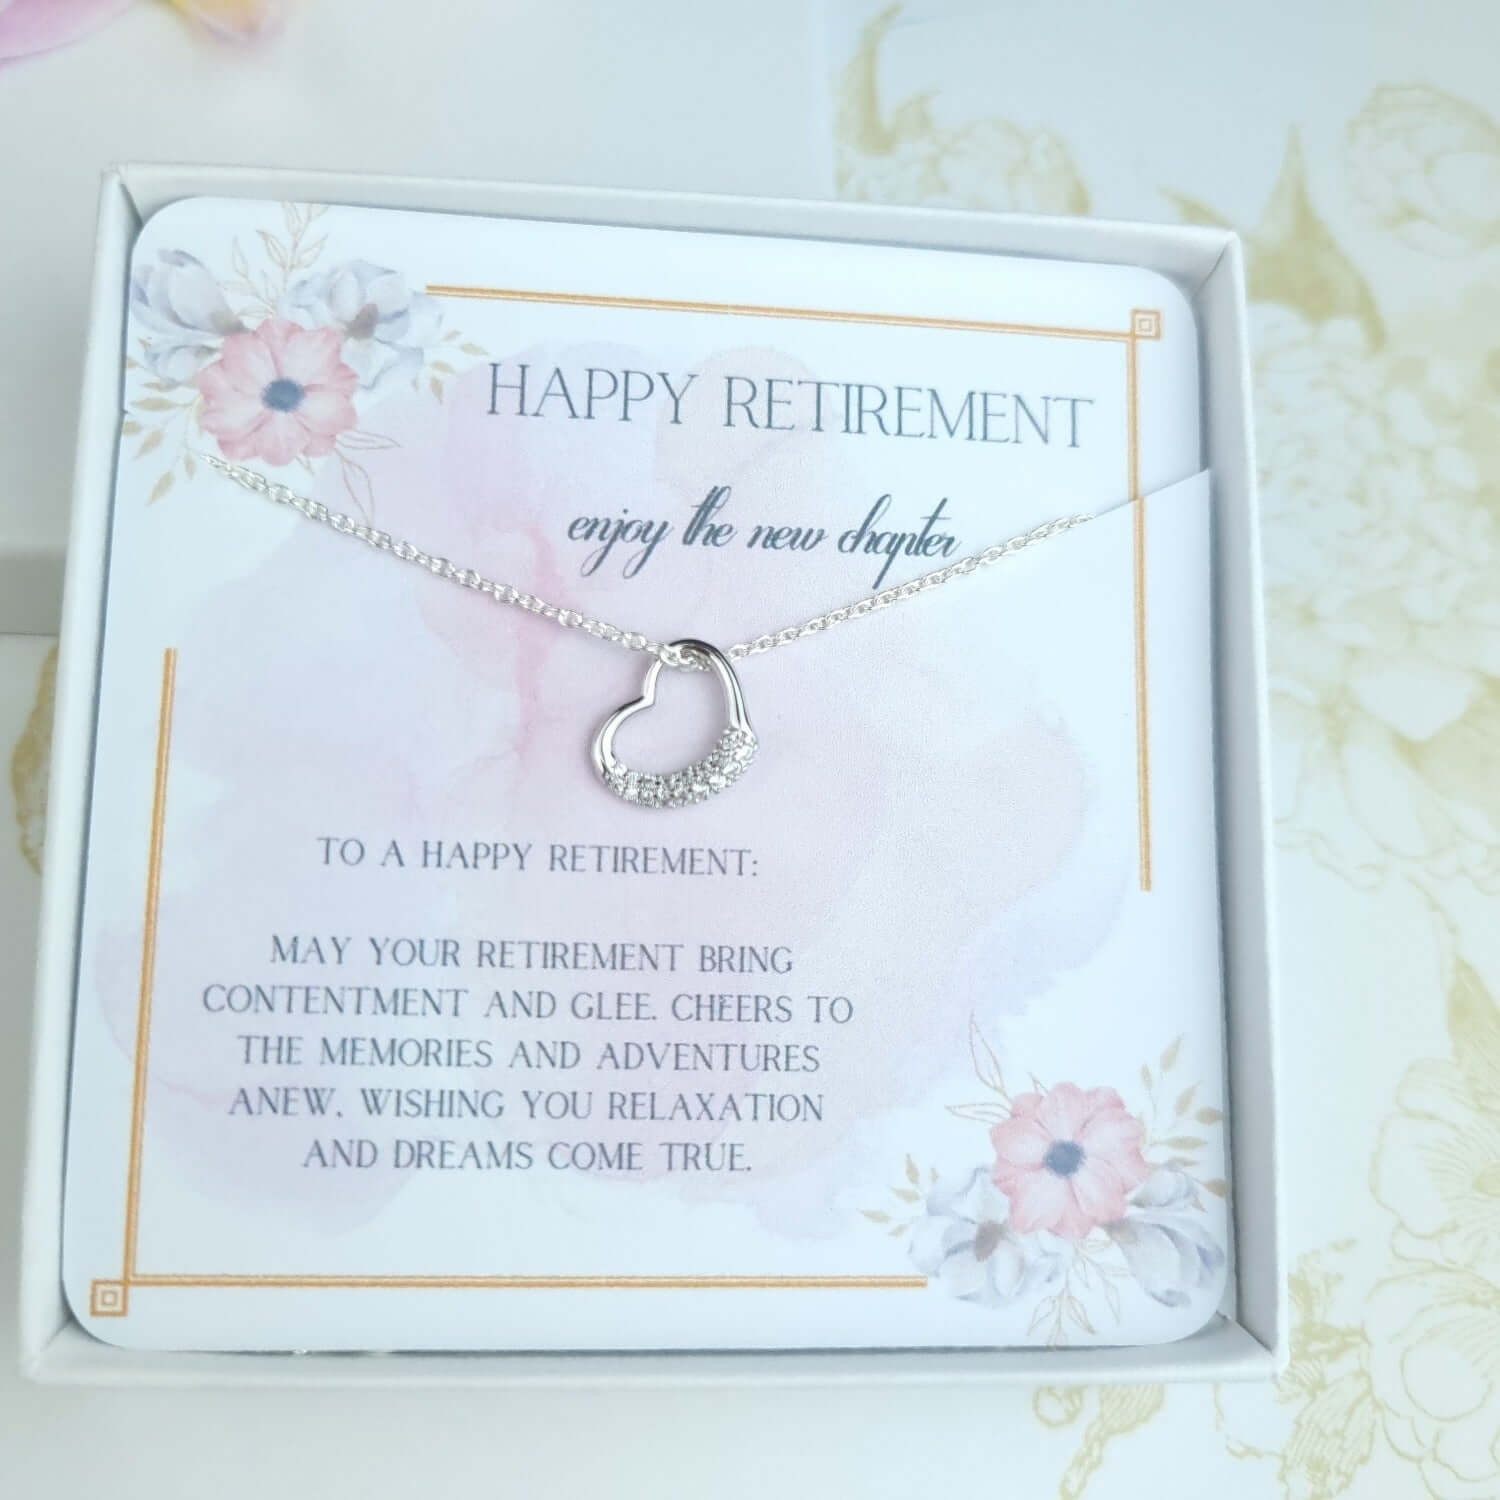 heart necklace in a gift box with a message "happy retirement"